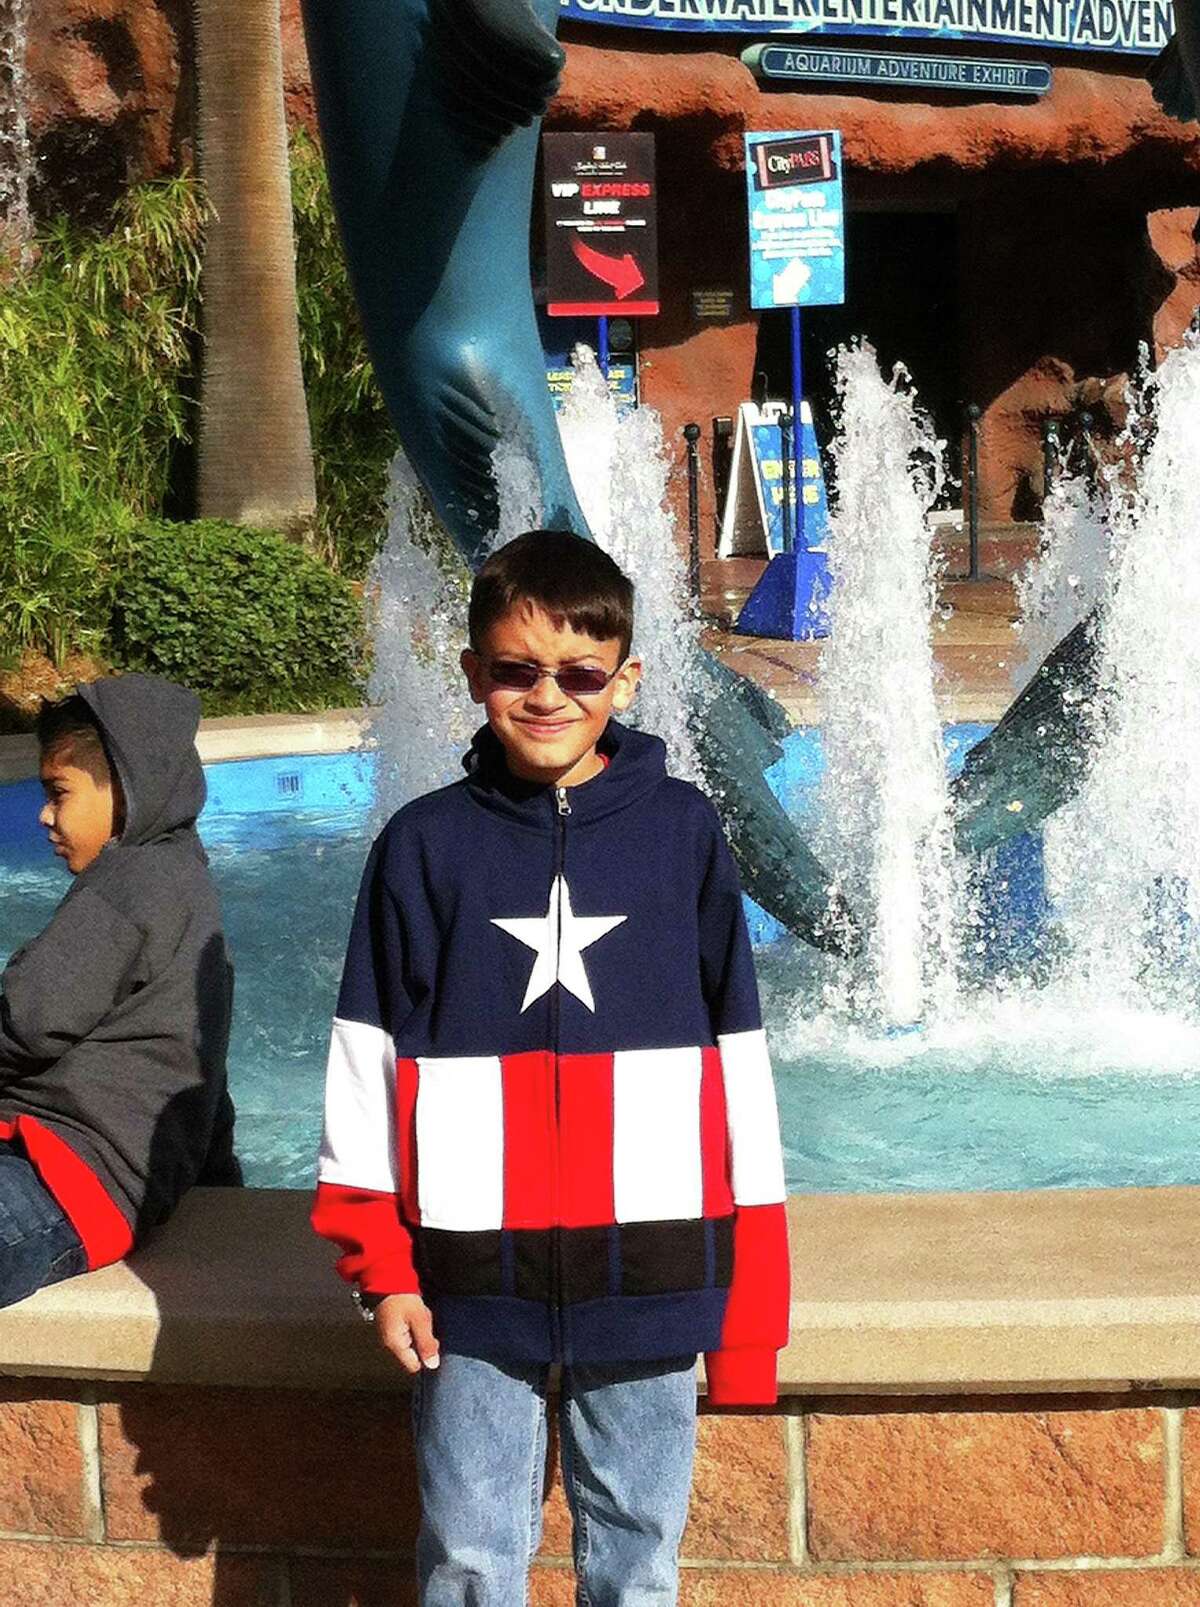 Brian wears his sunglasses and a brilliant red, white, and blue sweatshirt on a visit downtown to the Aquarium Restaurant.